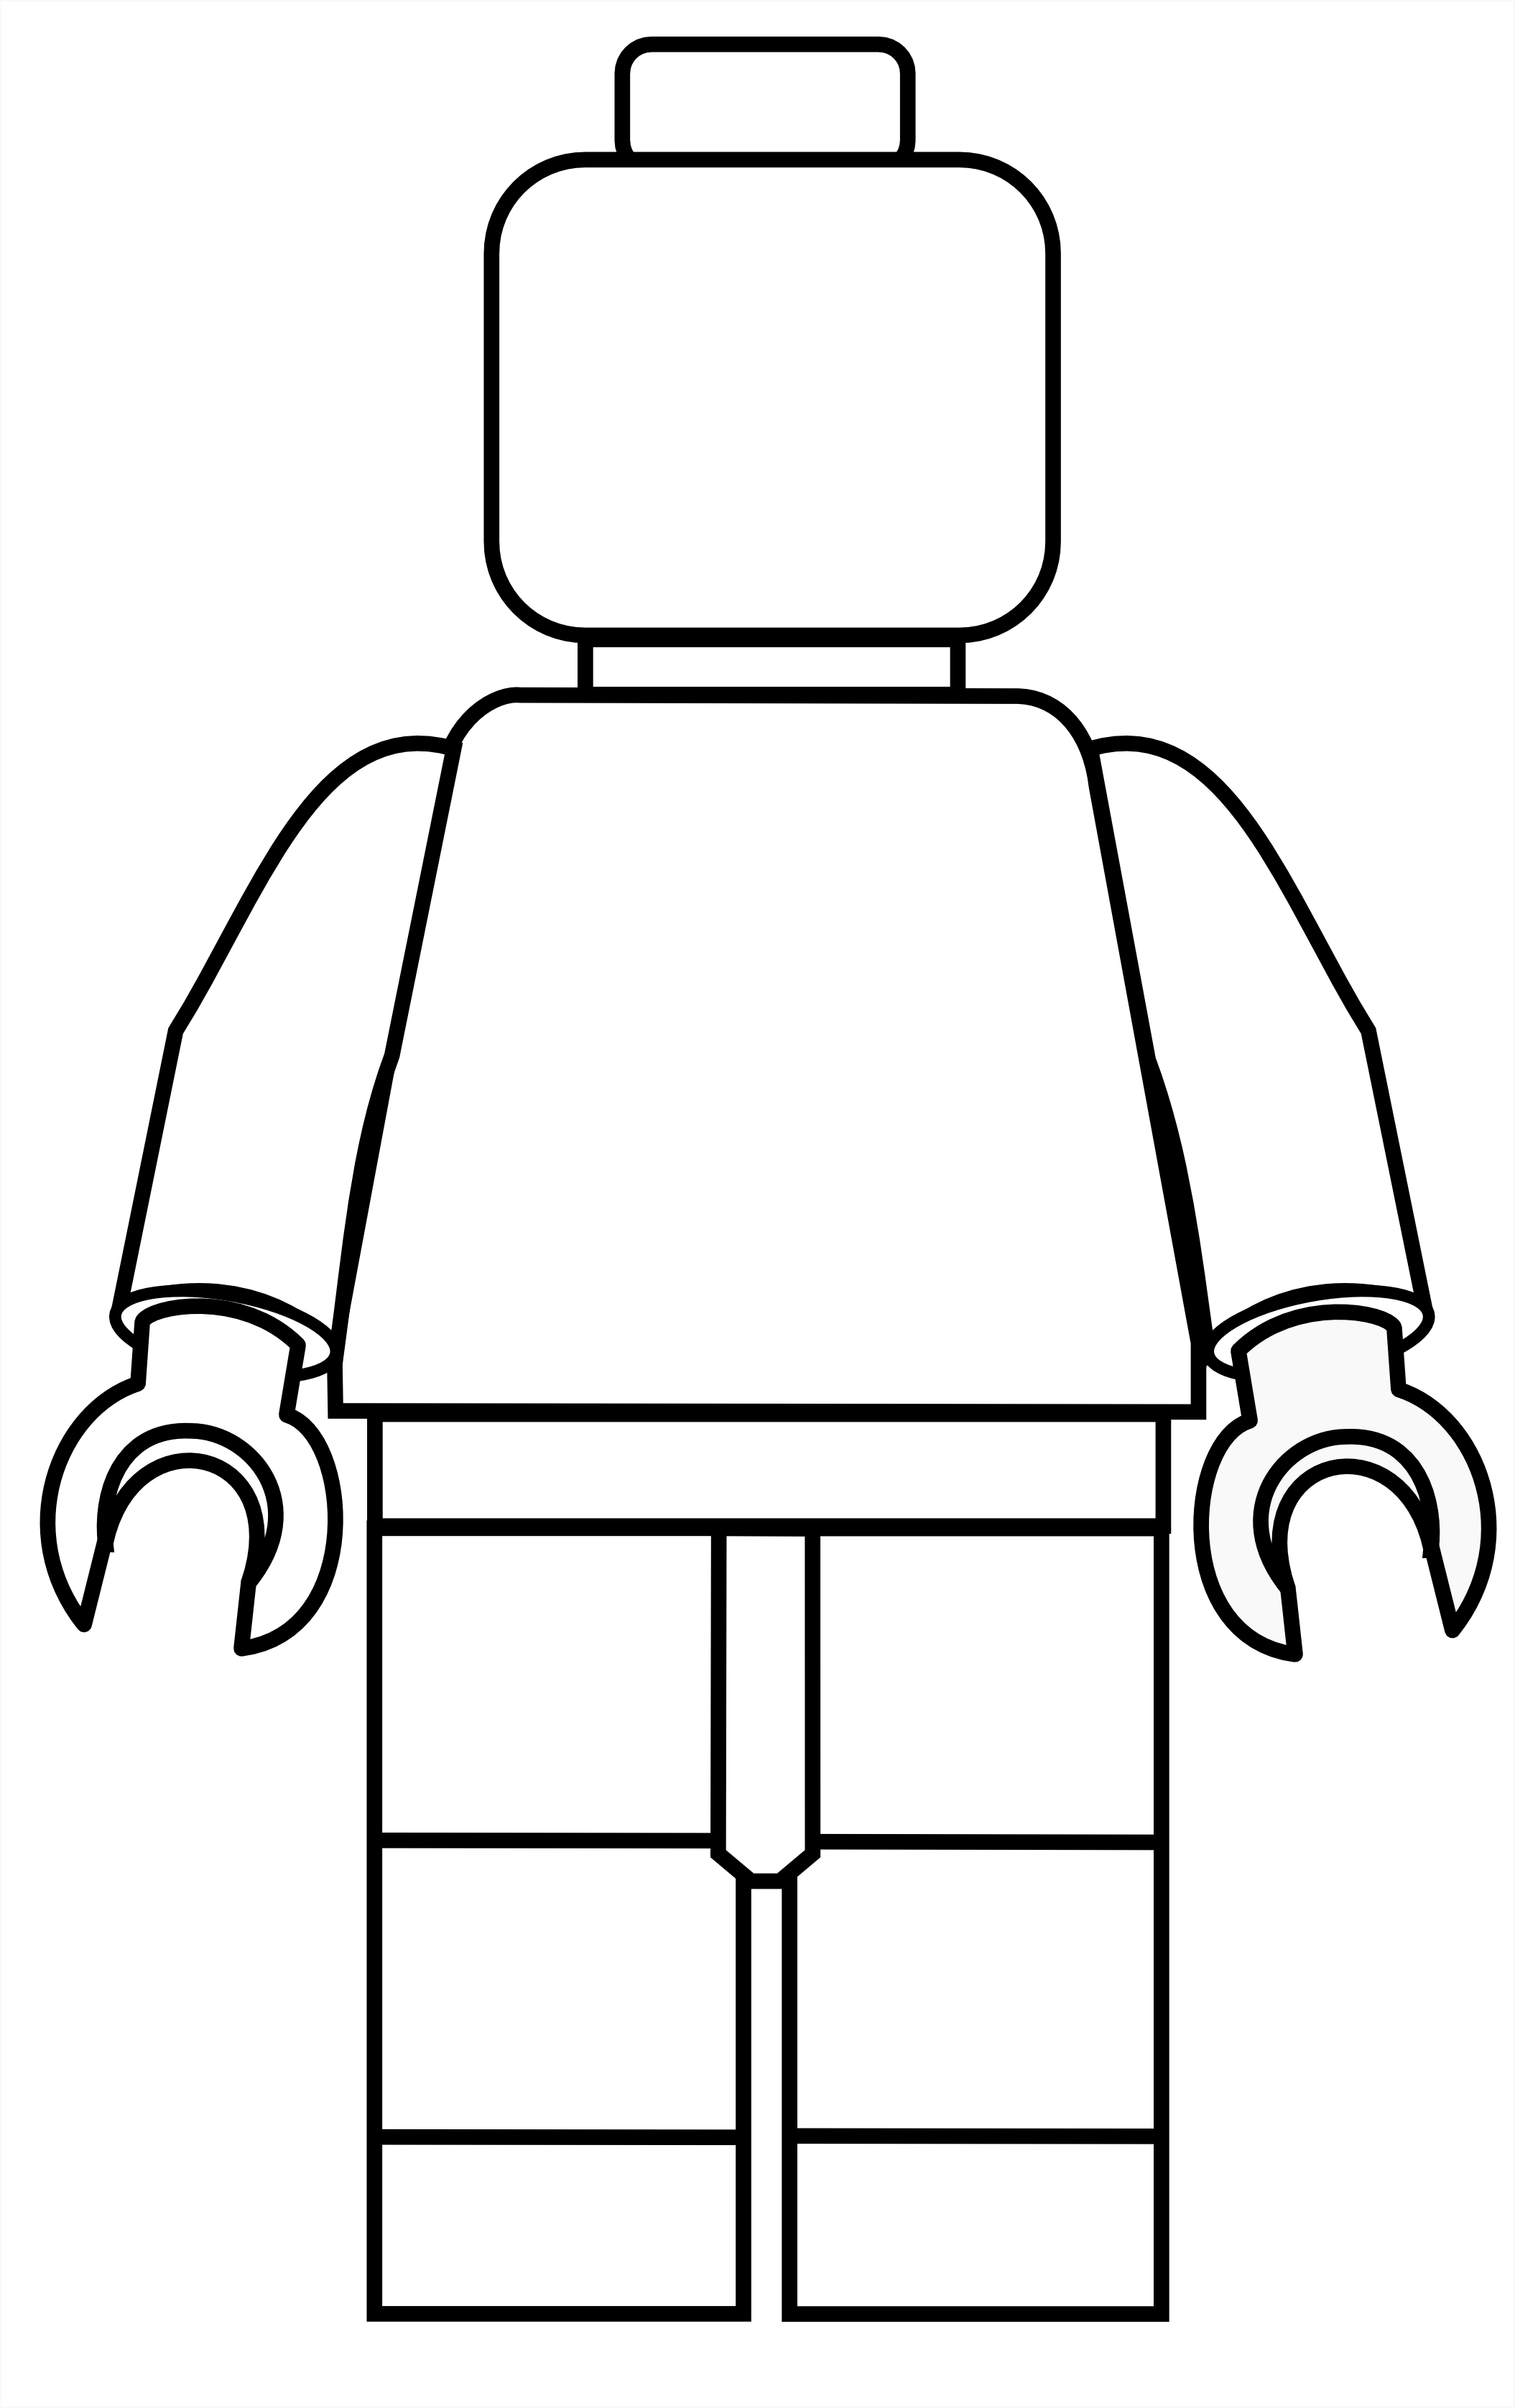 22 Outline Drawing Of A Person Free Cliparts That You Can Download To